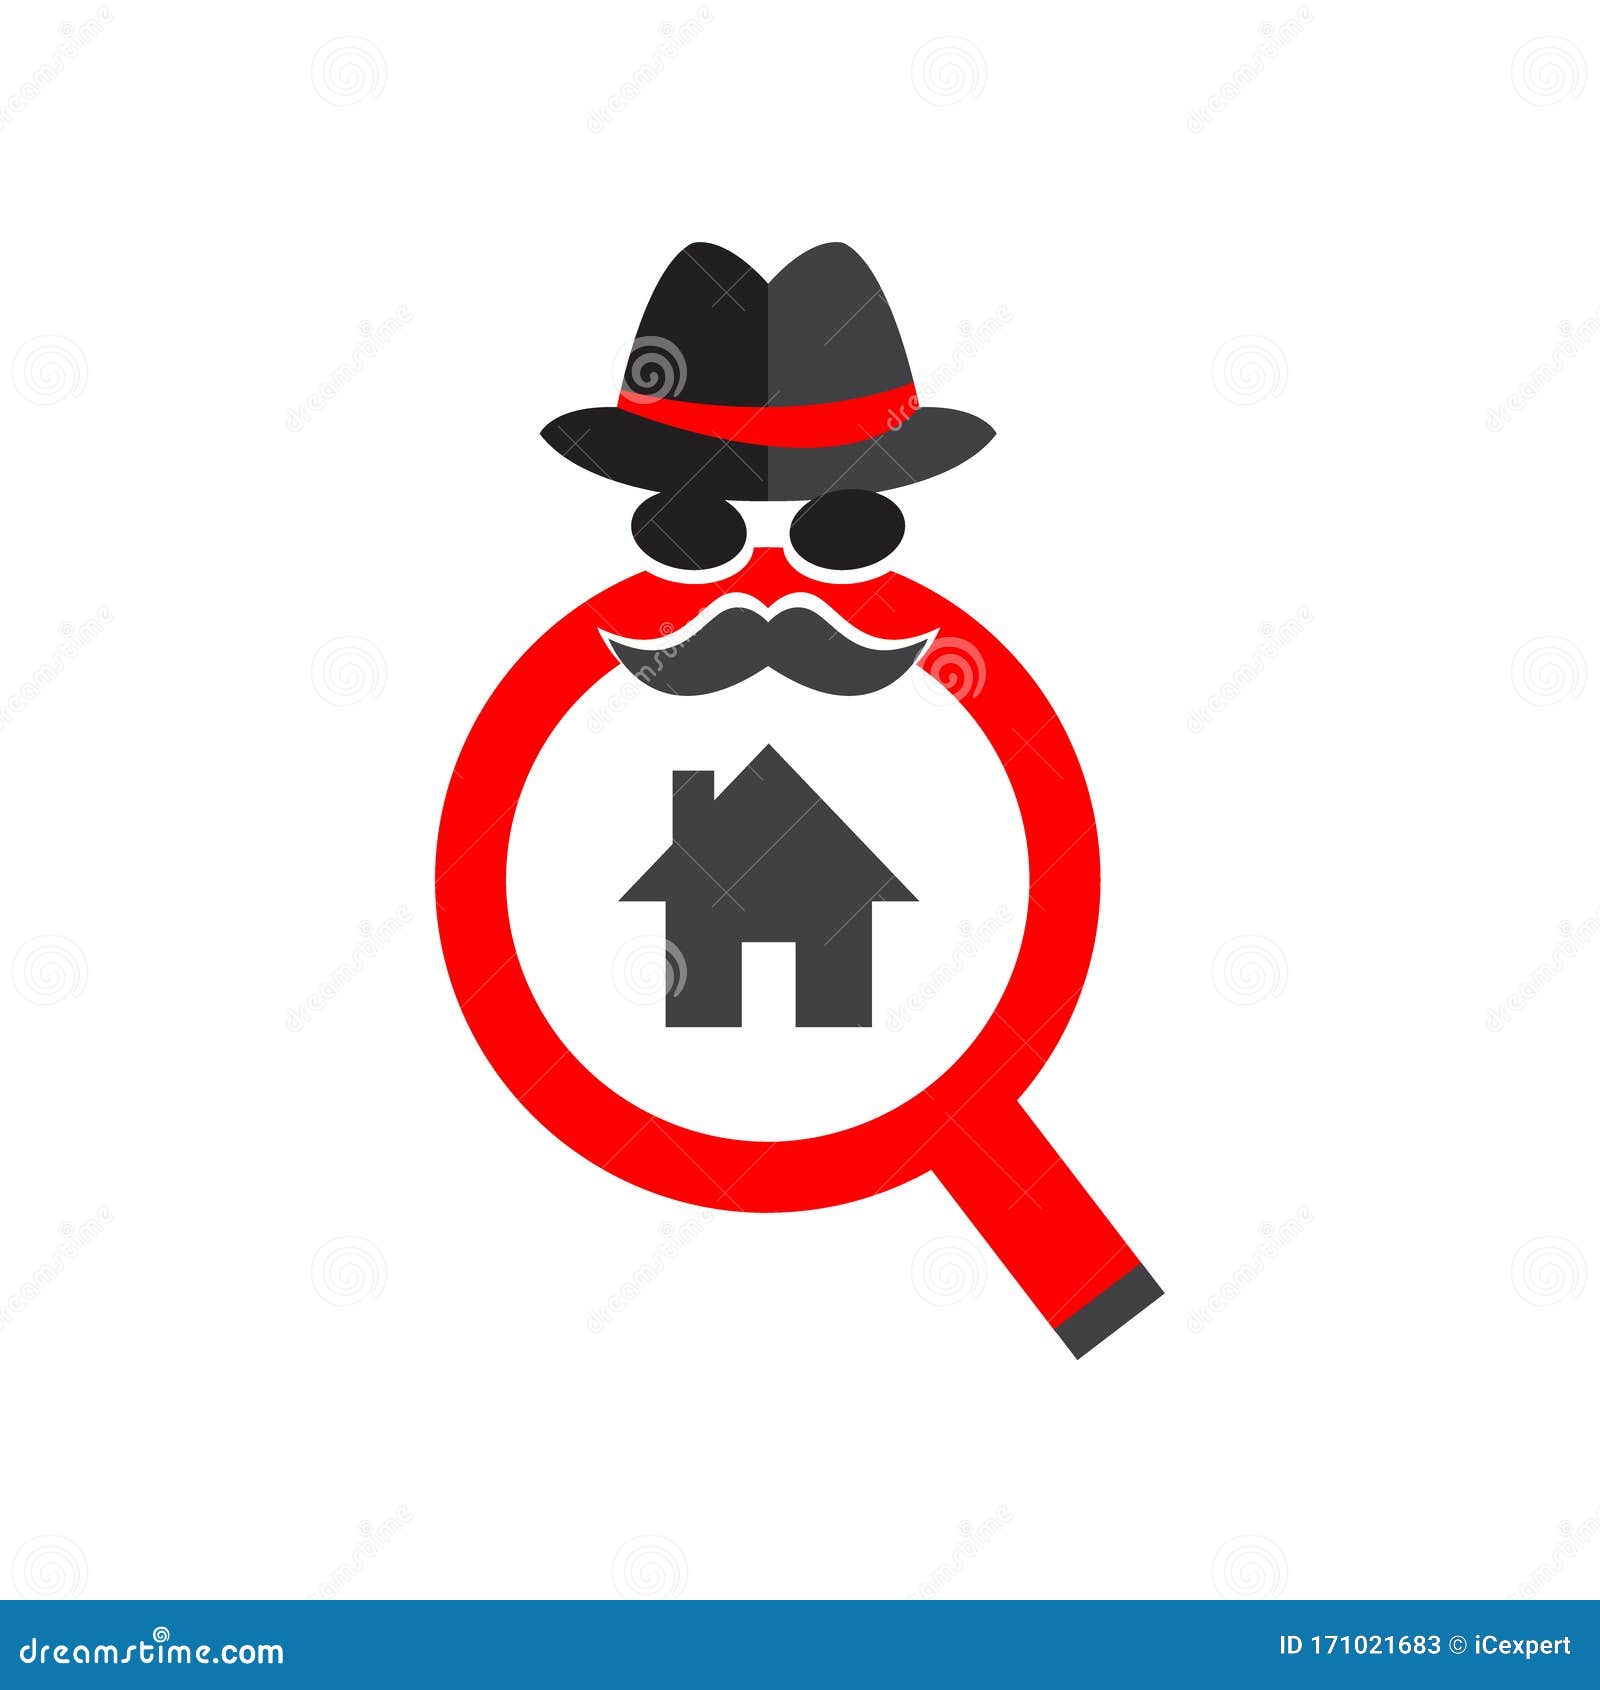 Download Home Inspection Services Minimal Logo Stock Vector ...